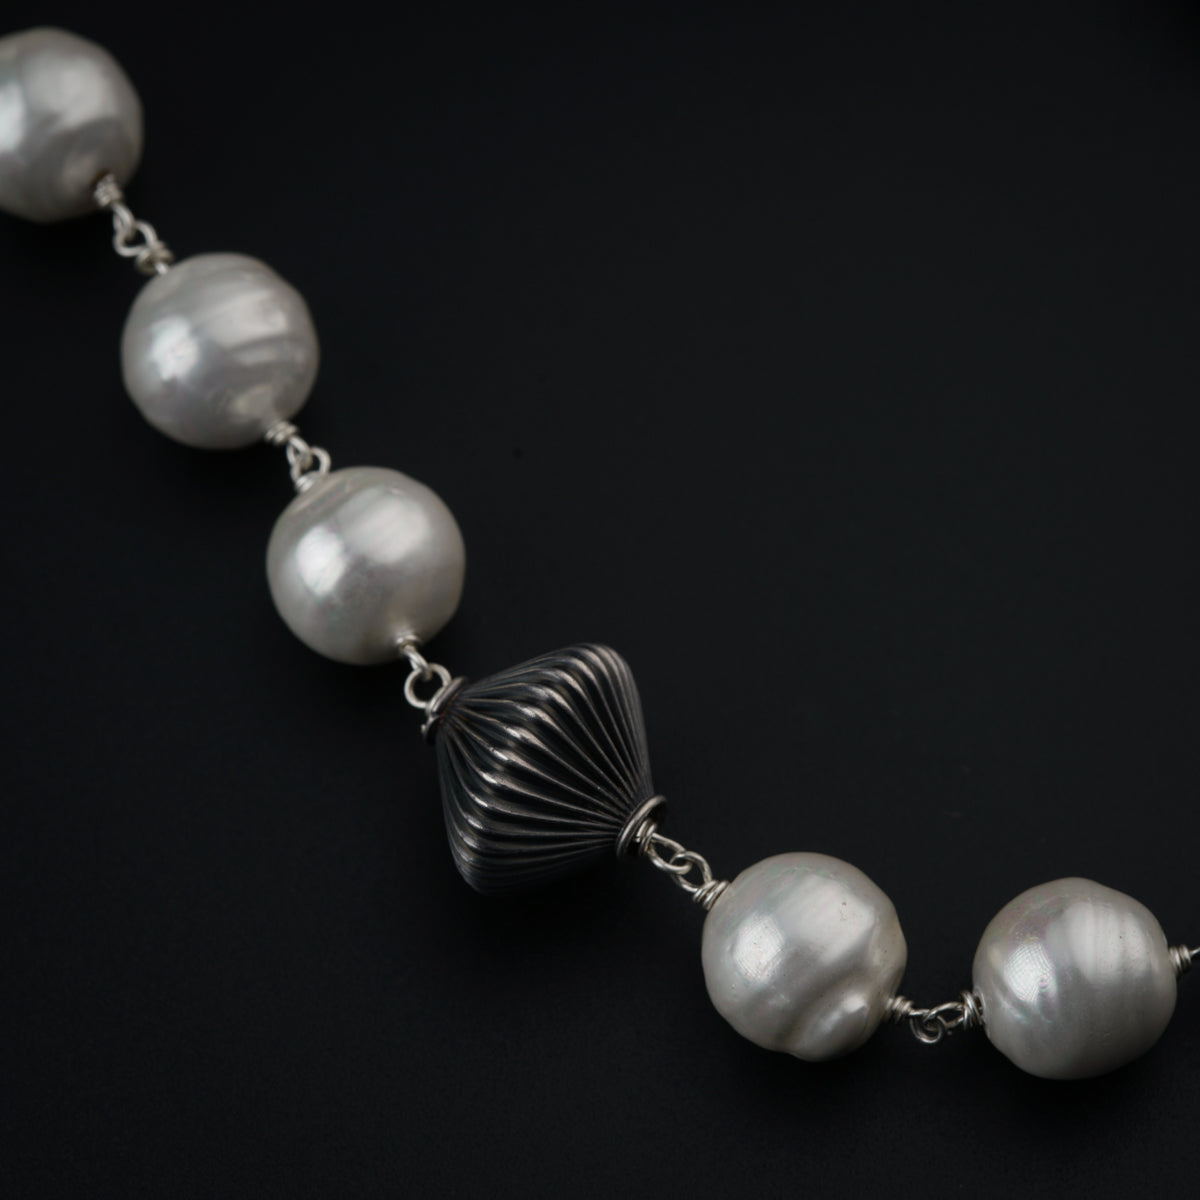 a necklace with pearls and a shell on a black background